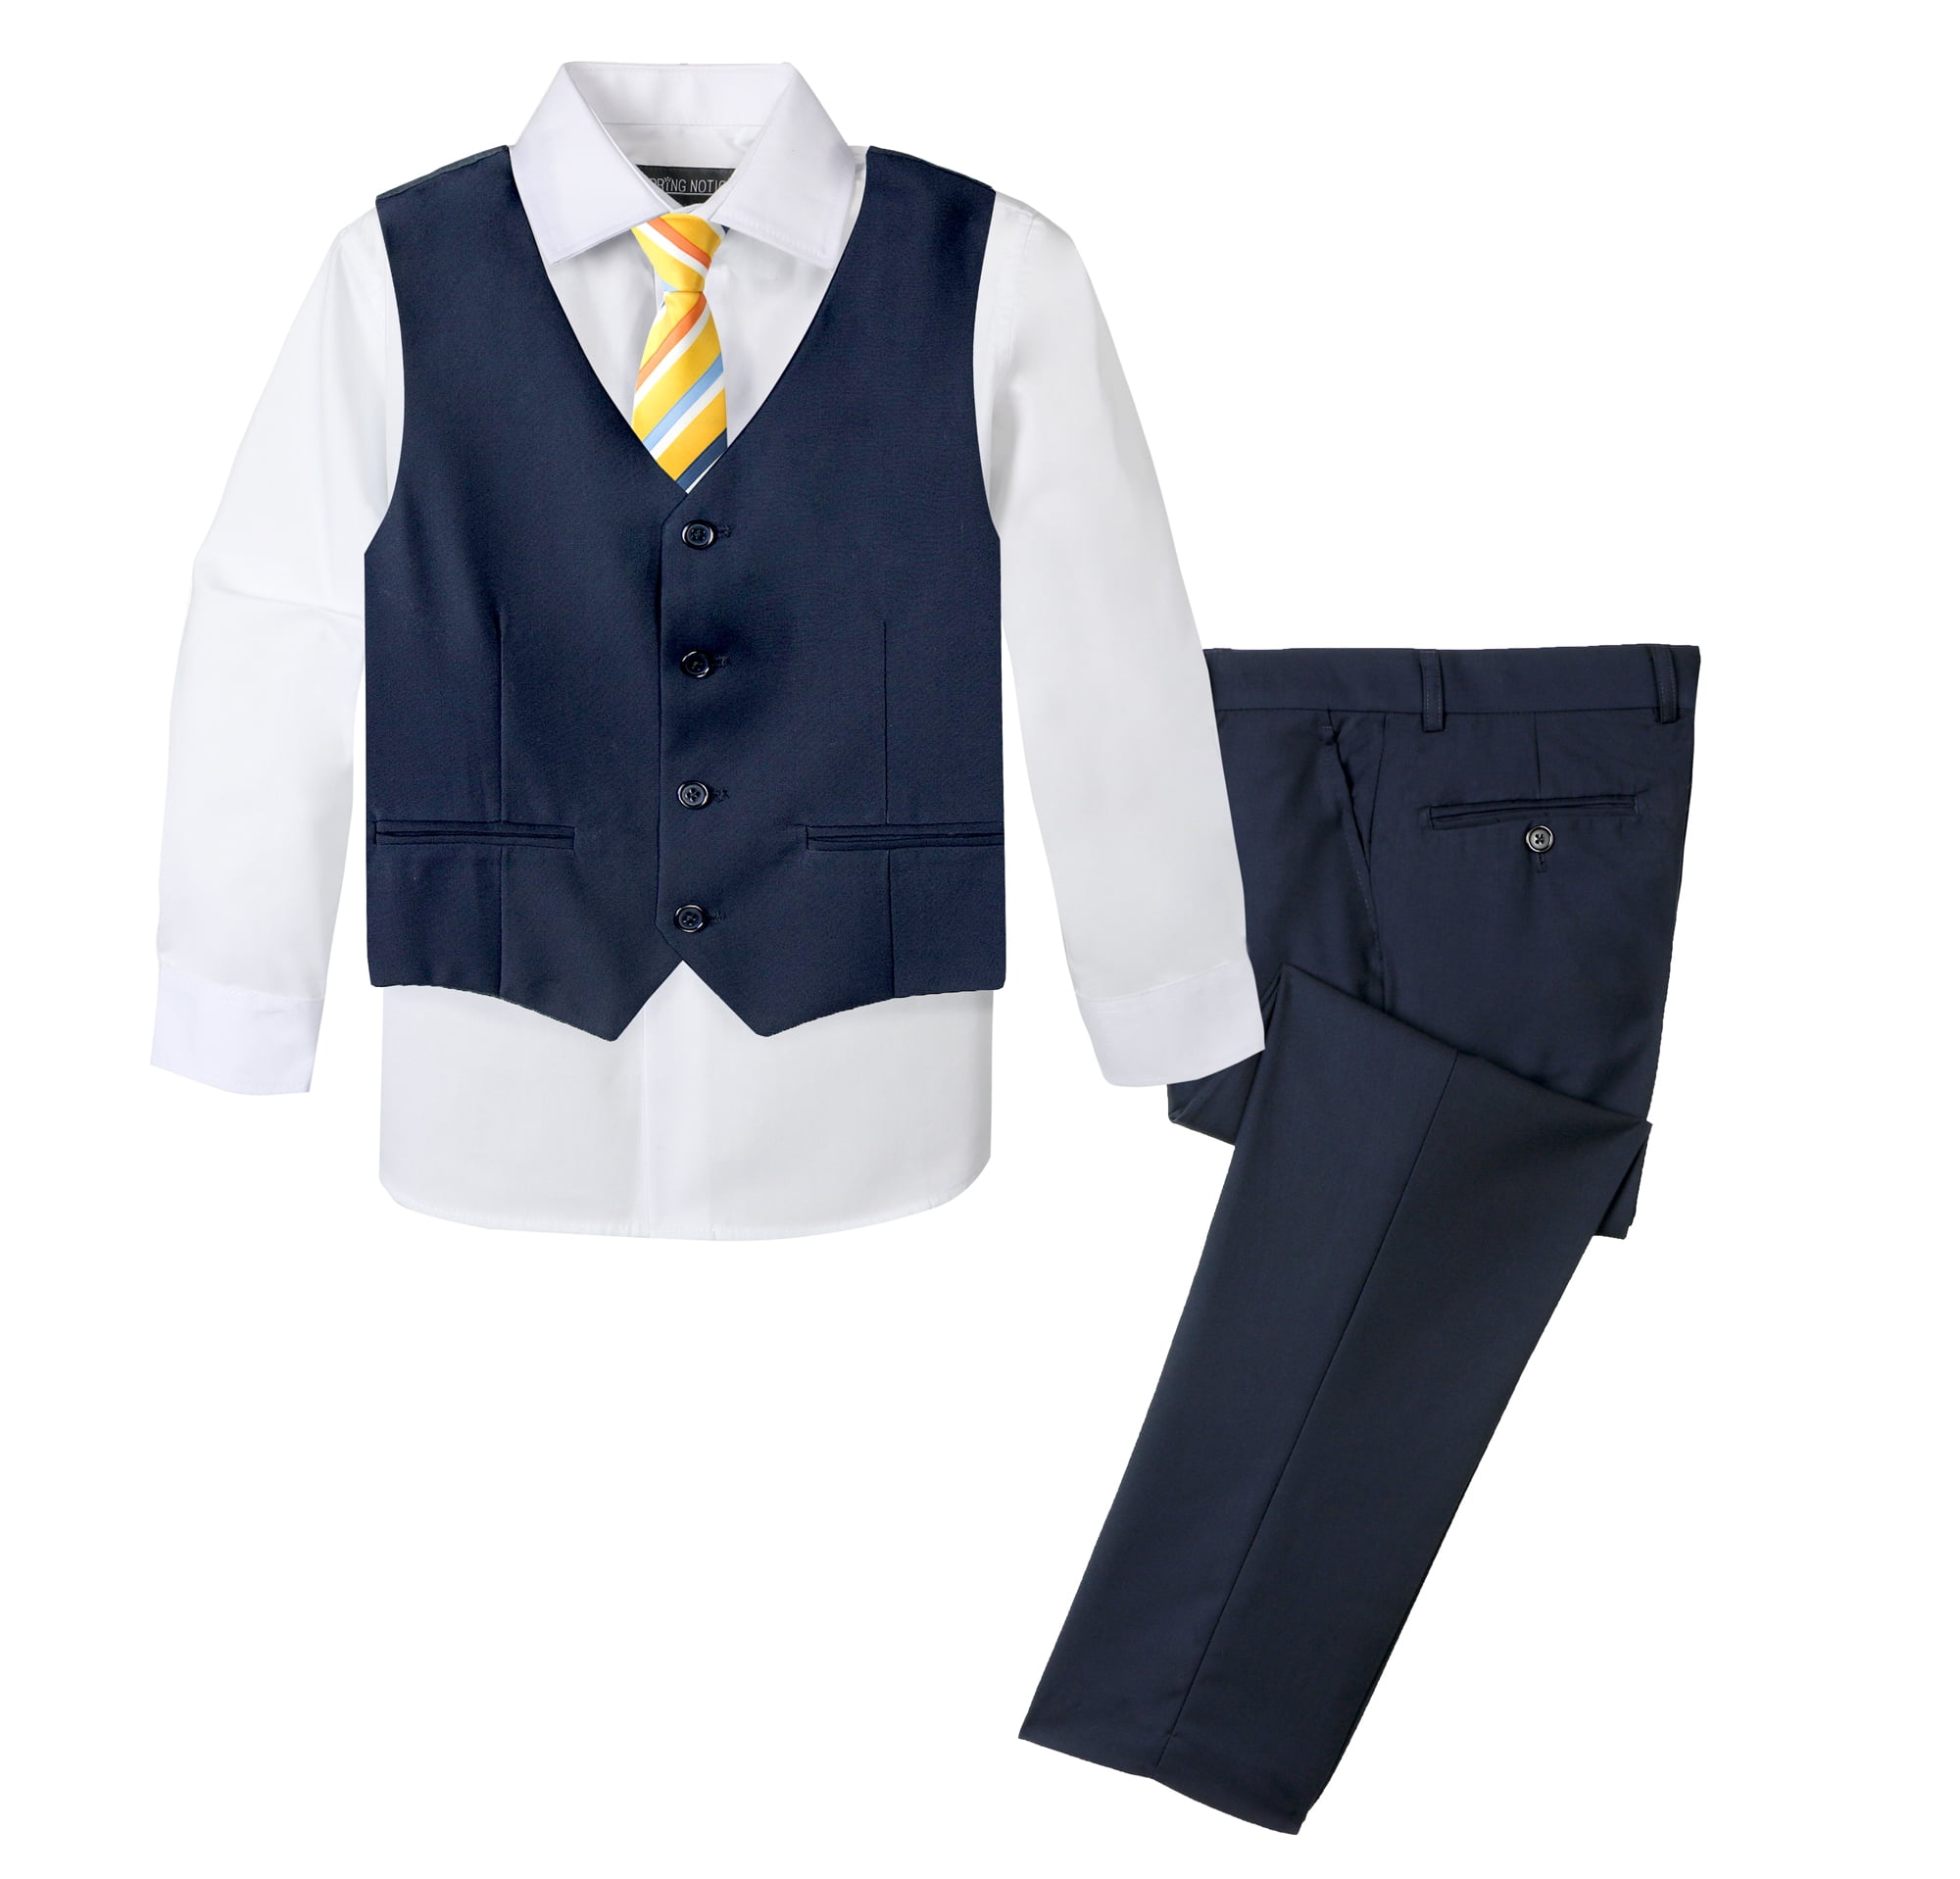 Baby Boys Smart Formal Suit Outfit Set Page Boy Wedding Primark Disney Bow Tie 